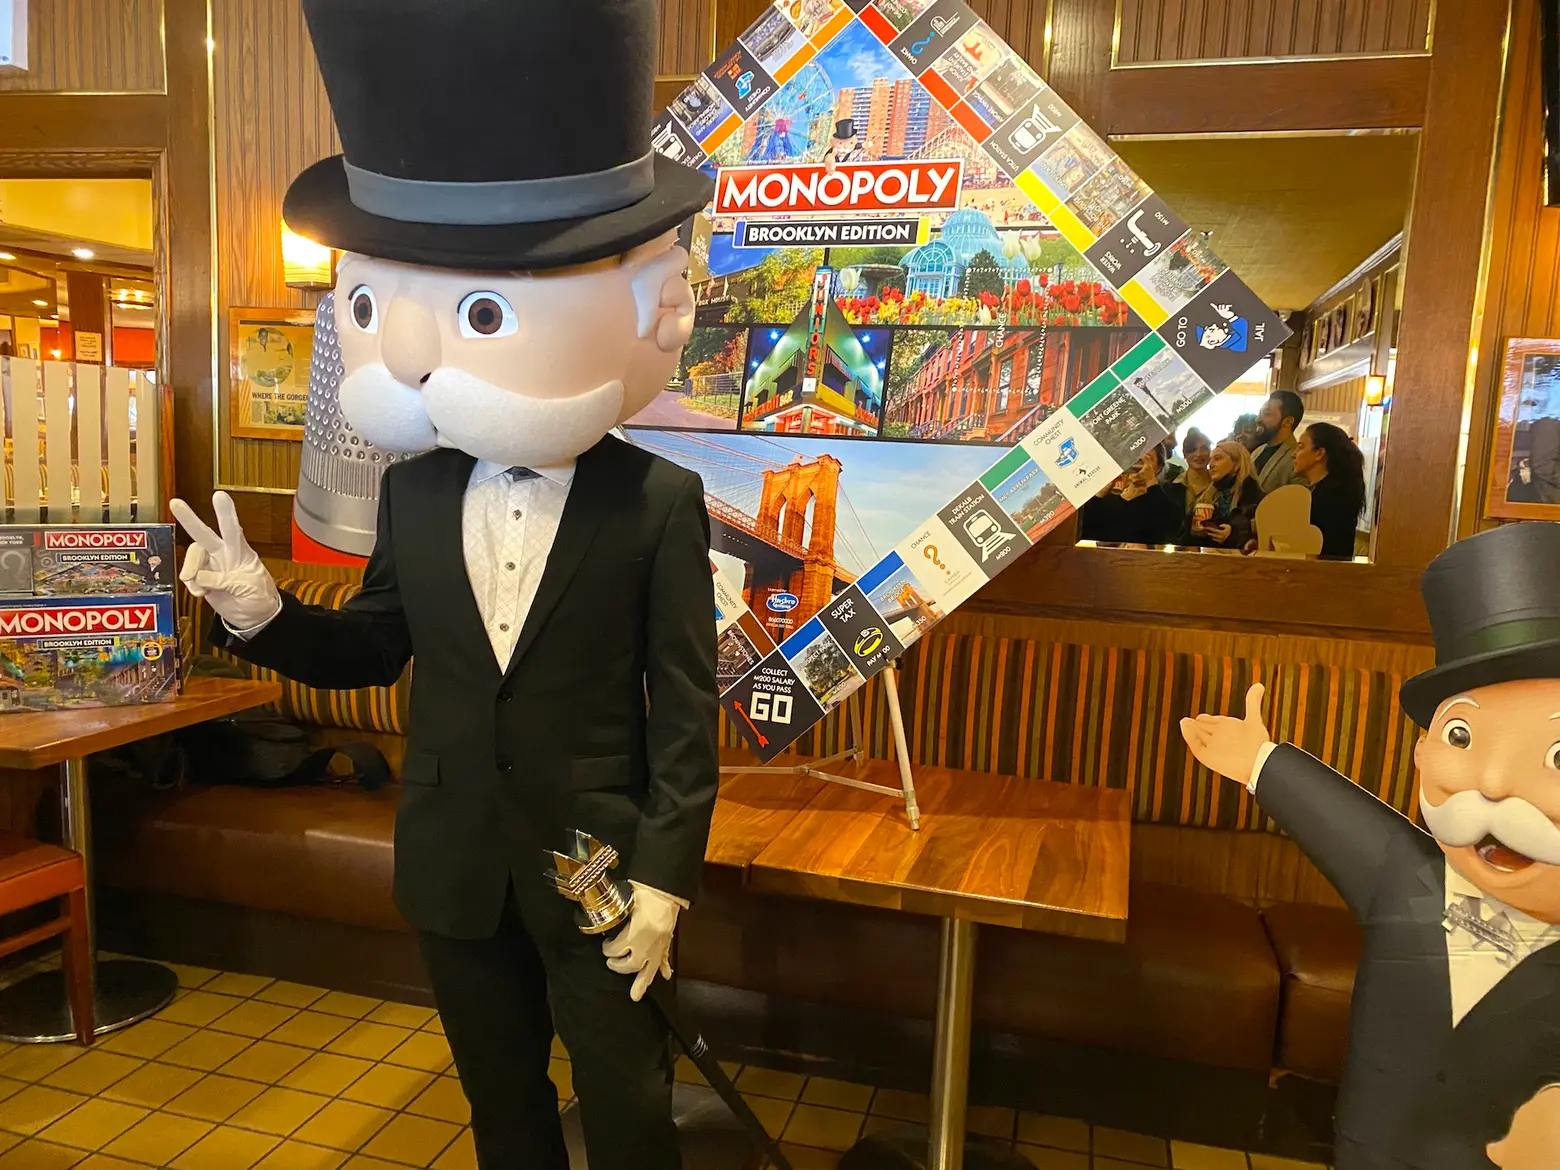 A Brooklyn edition of Monopoly is now available